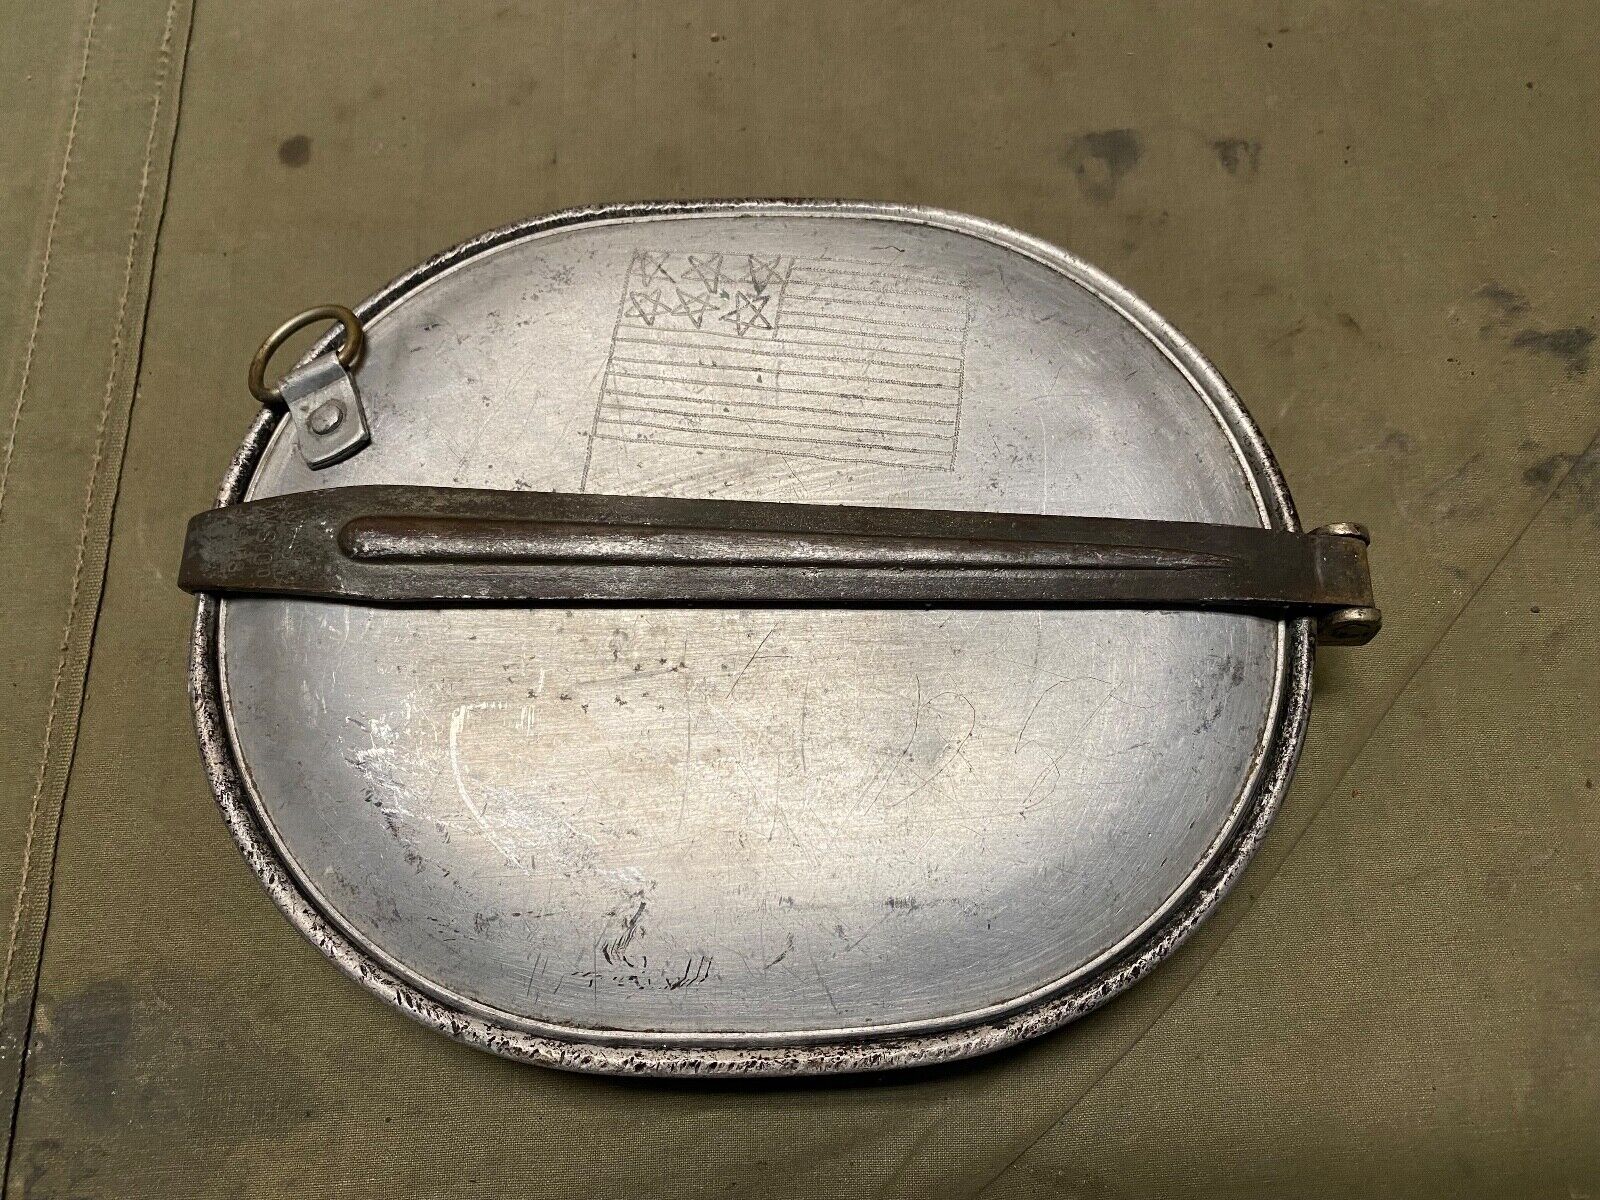 ORIGINAL WWI WWII US ARMY M1910 MESS KIT-DATED 1918, NAMED, TRENCH ART